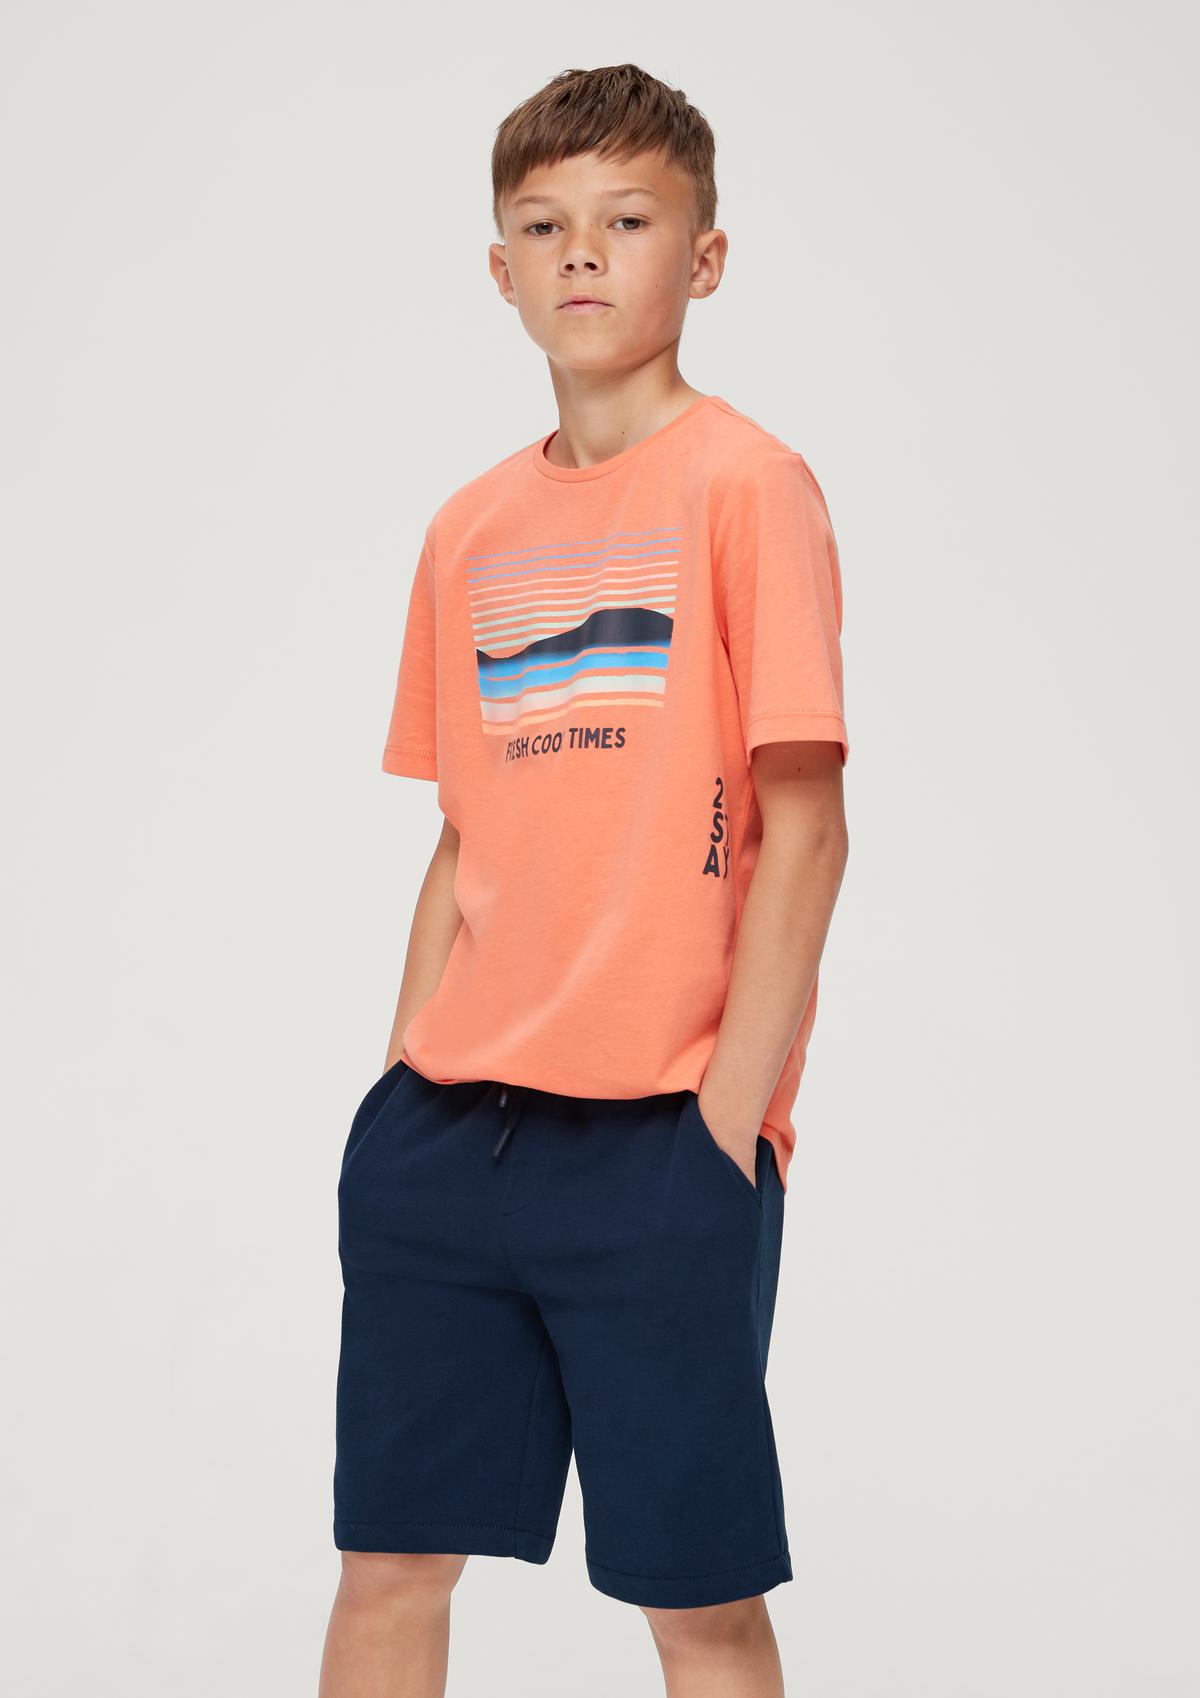 Find for shorts Bermuda boys and online teens